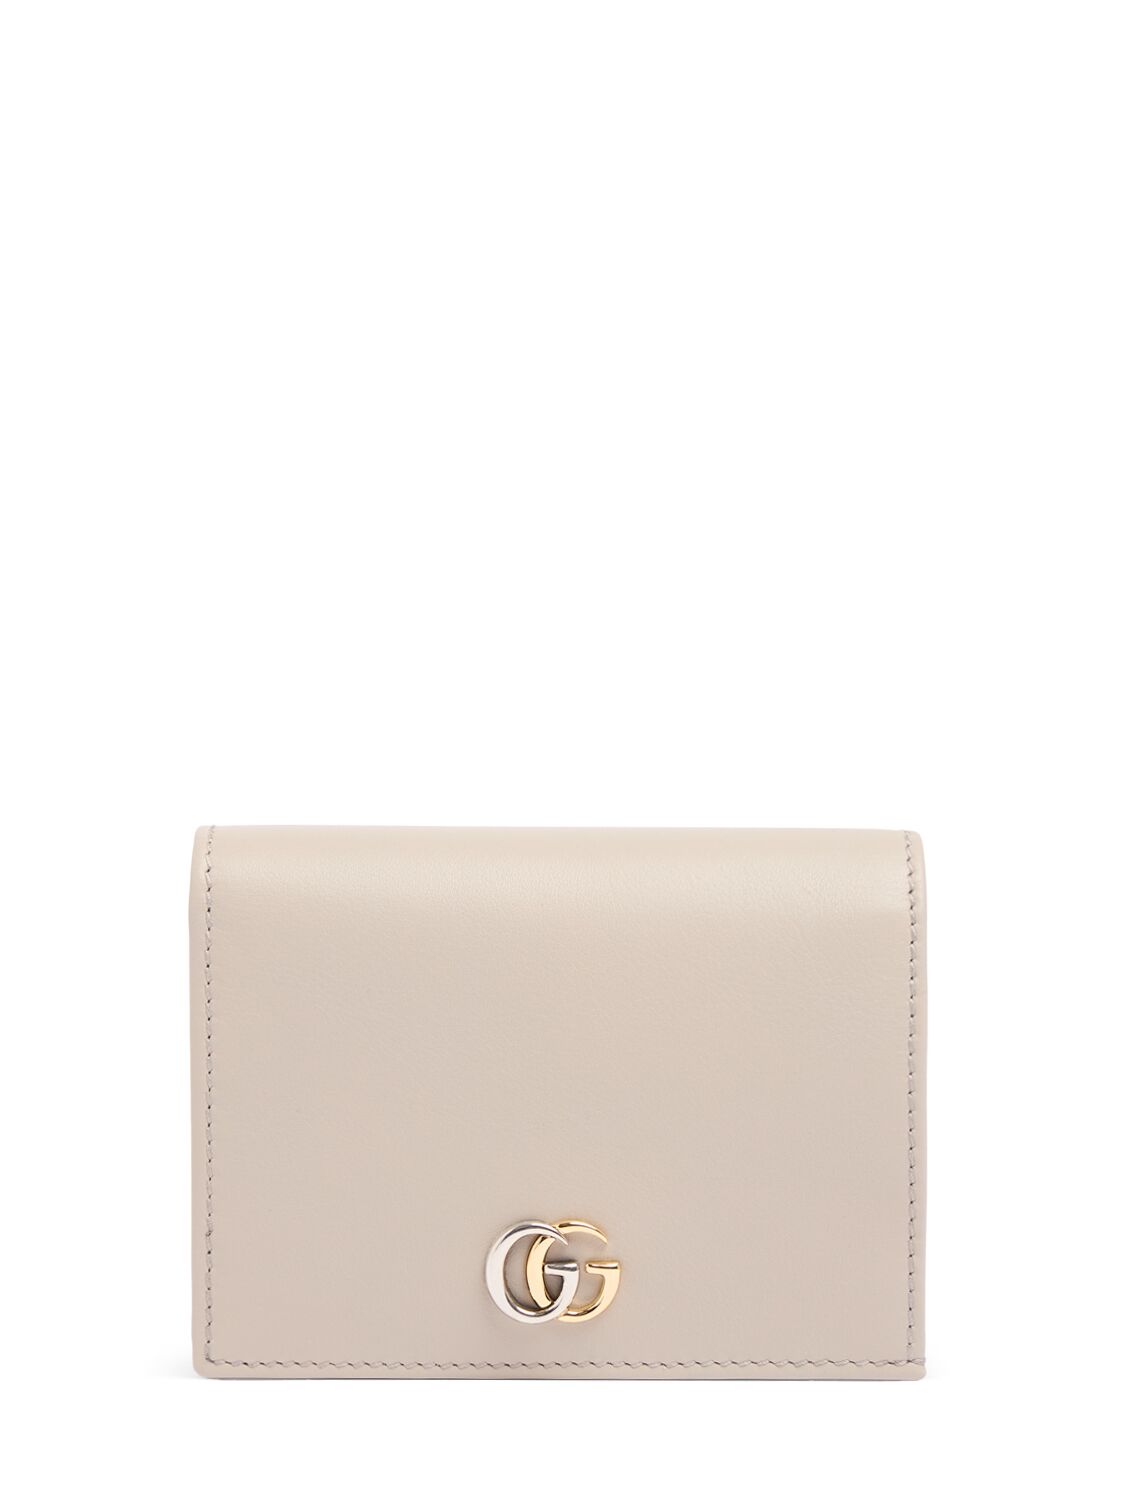 Image of Gg Marmont Leather Card Case Wallet